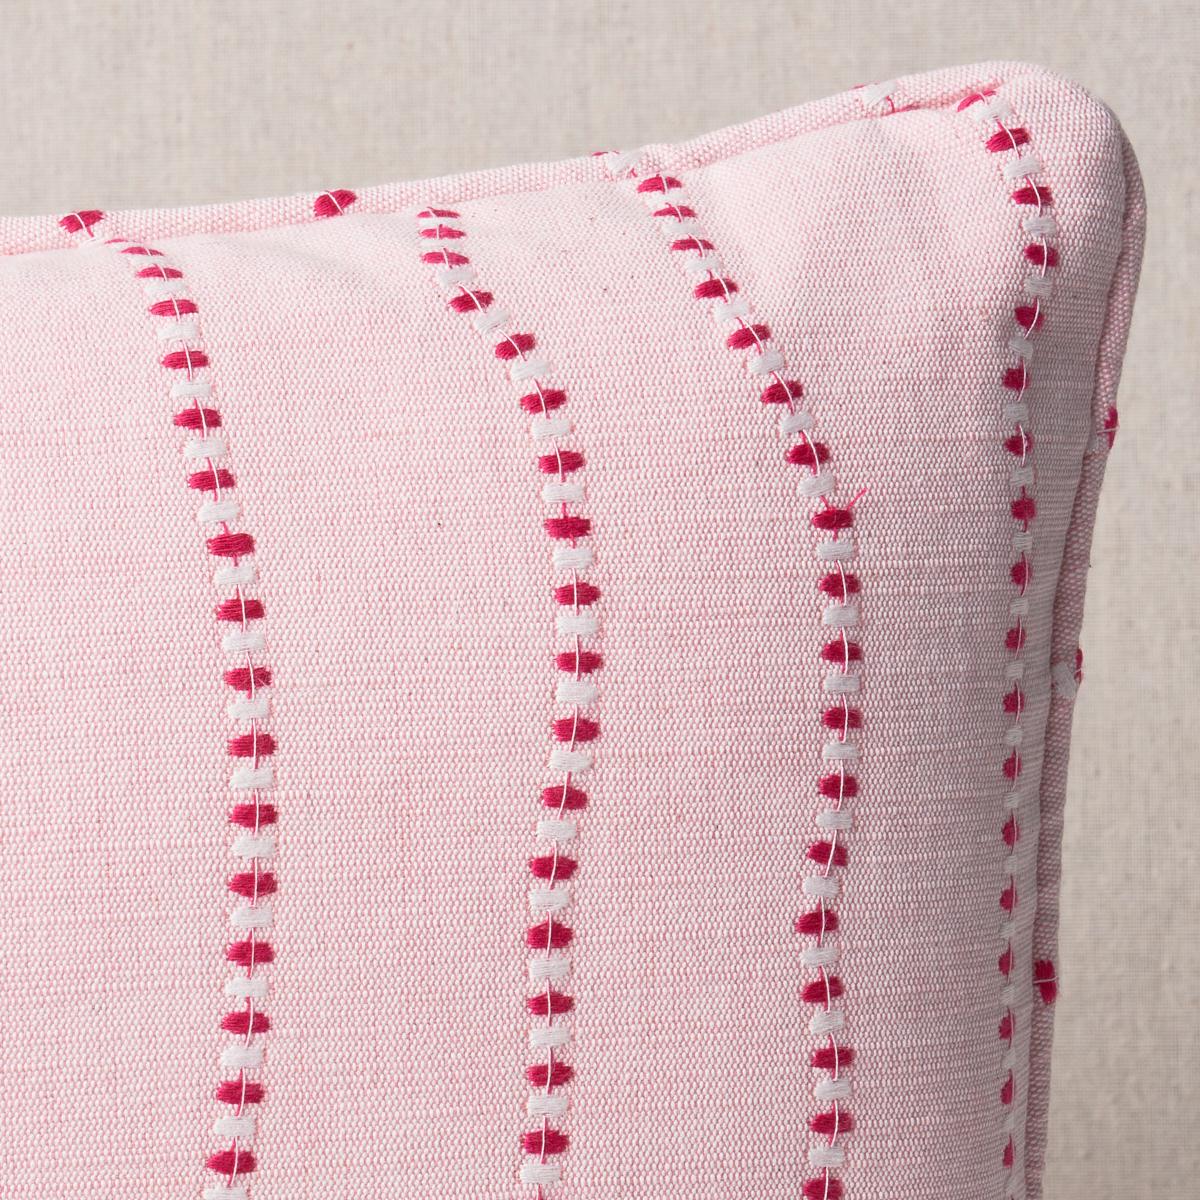 This pillow features Elodie Embroidery with a self welt finish. The wavy lines stitched in alternating thread colors make Elodie Embroidery in rose a uniquely rhythmic alternative to a conventional stripe. Pillow includes a feather/down fill insert